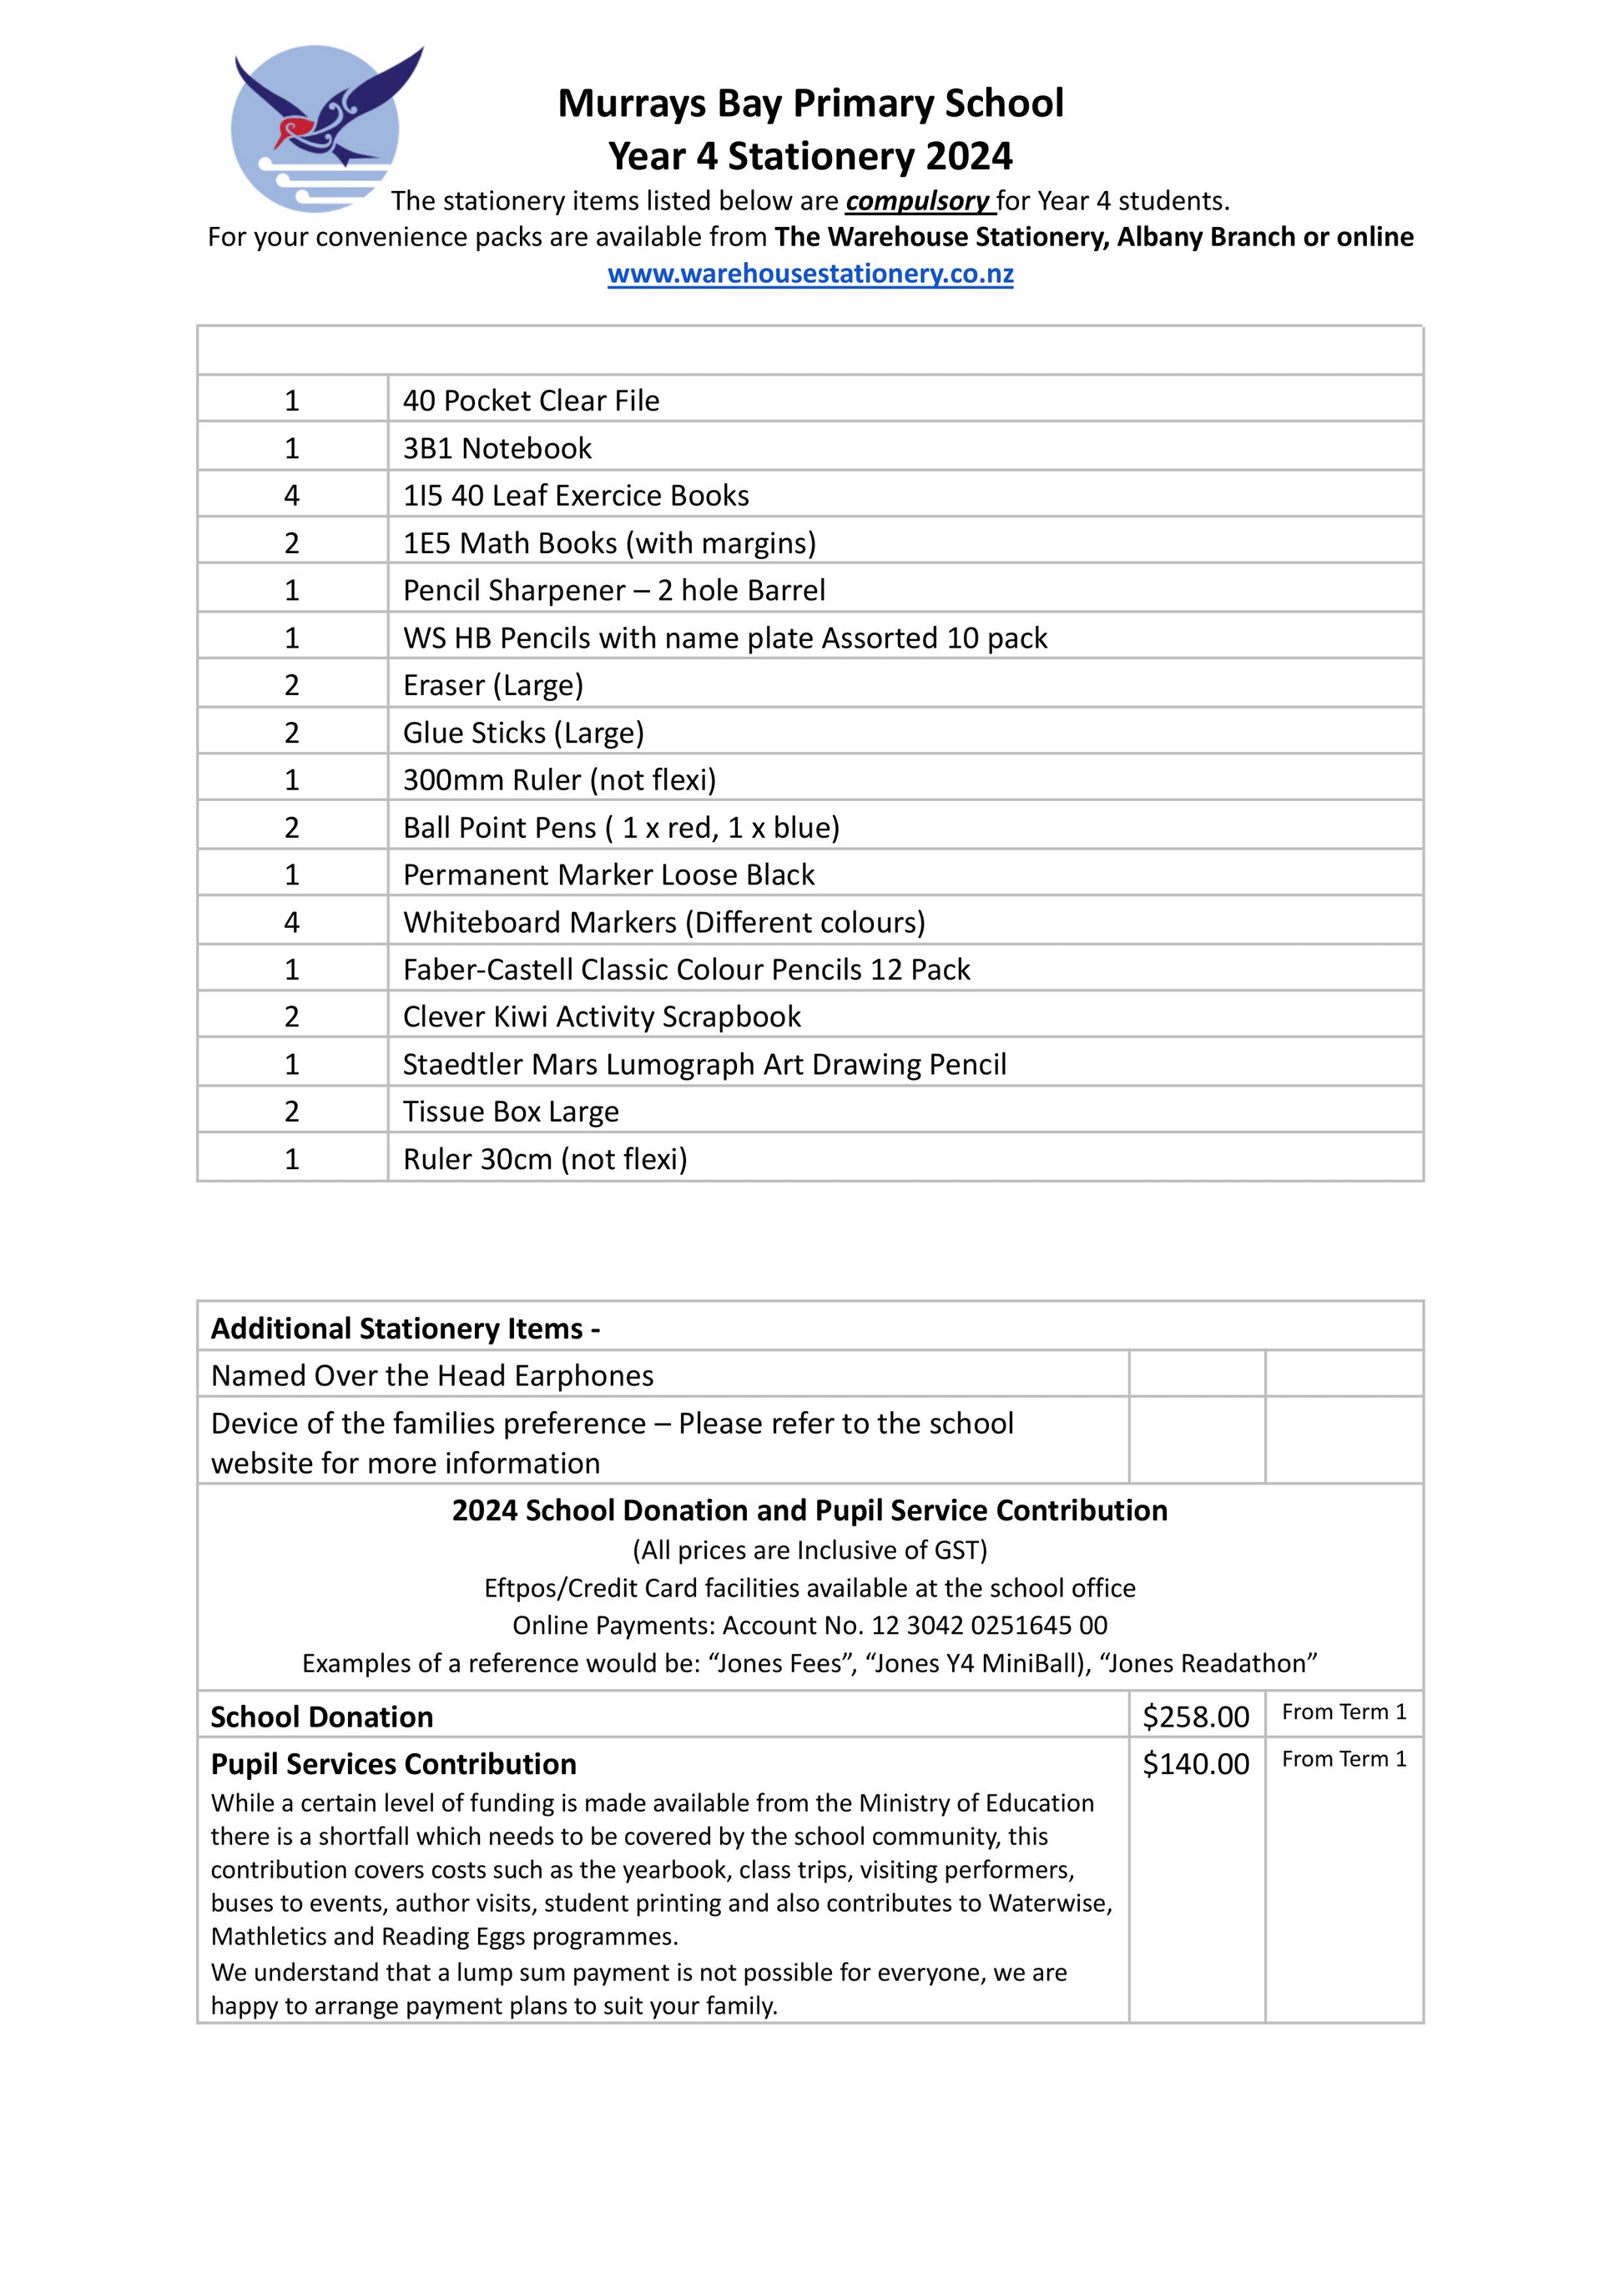 Murrays Bay Primary School Stationery Pack 2024 Year 4